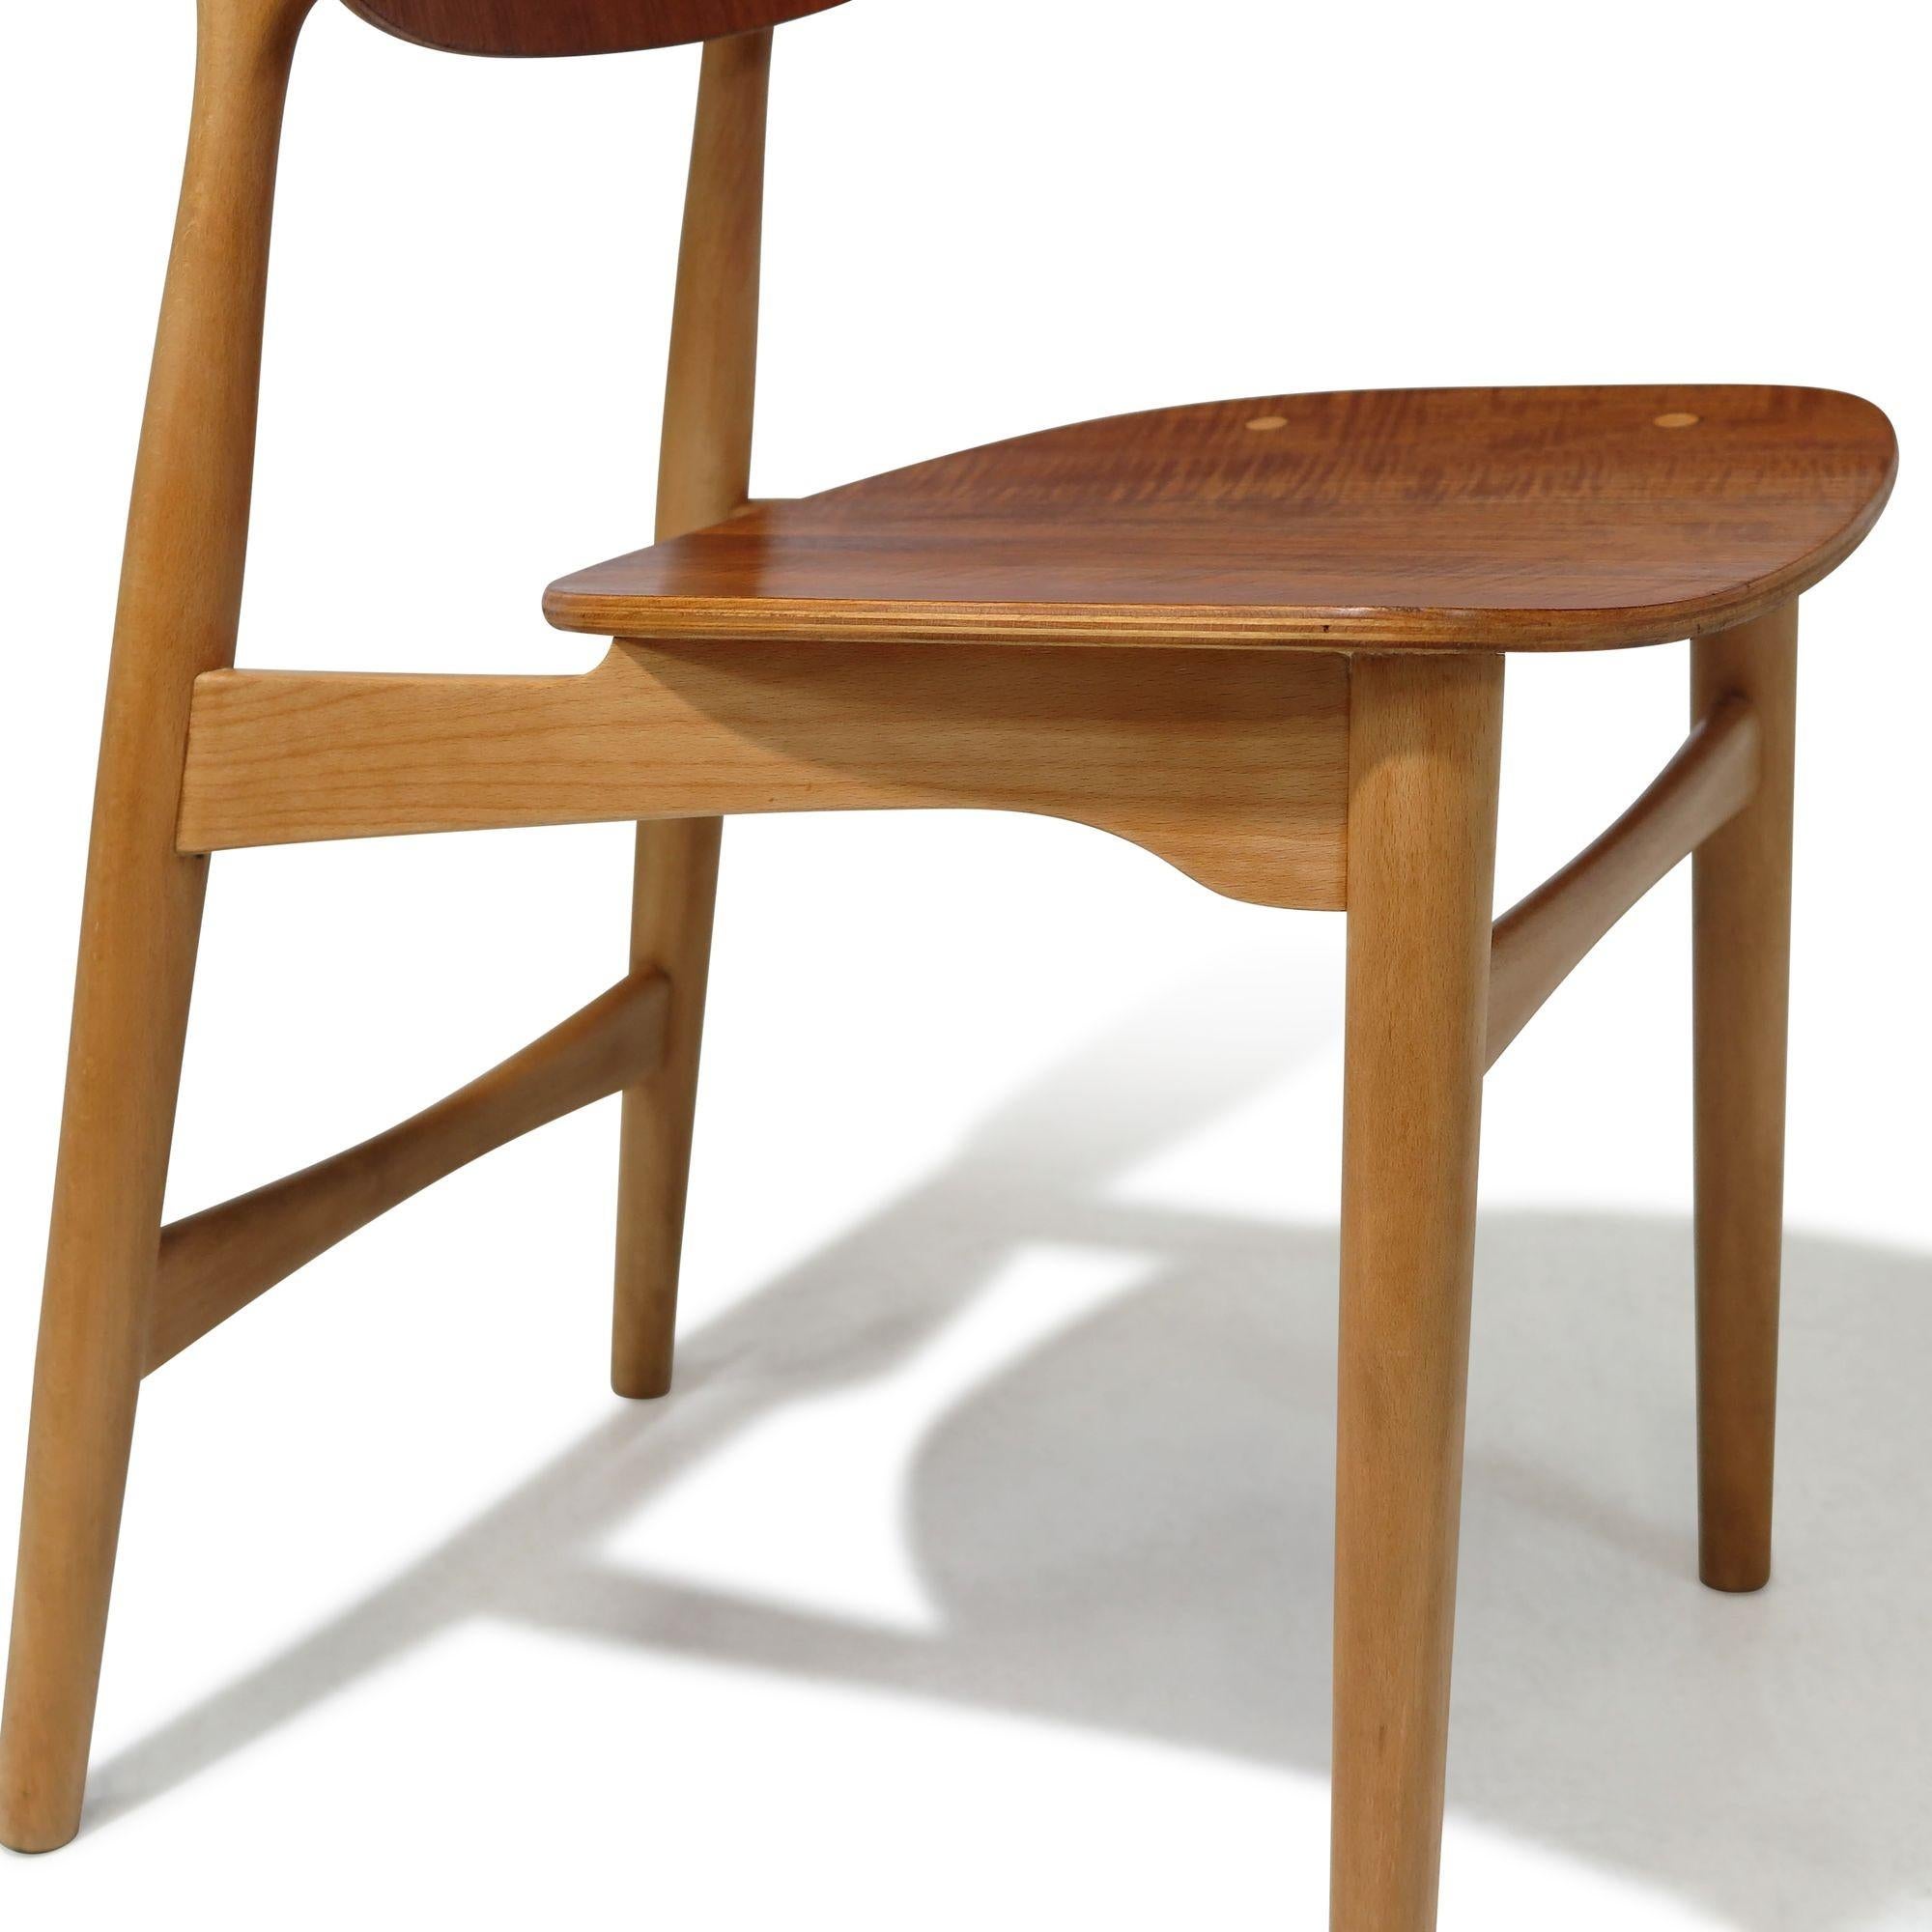 Oiled Eight Jens Hjorth Beech and Teak Mid-century Danish Dining Chairs For Sale